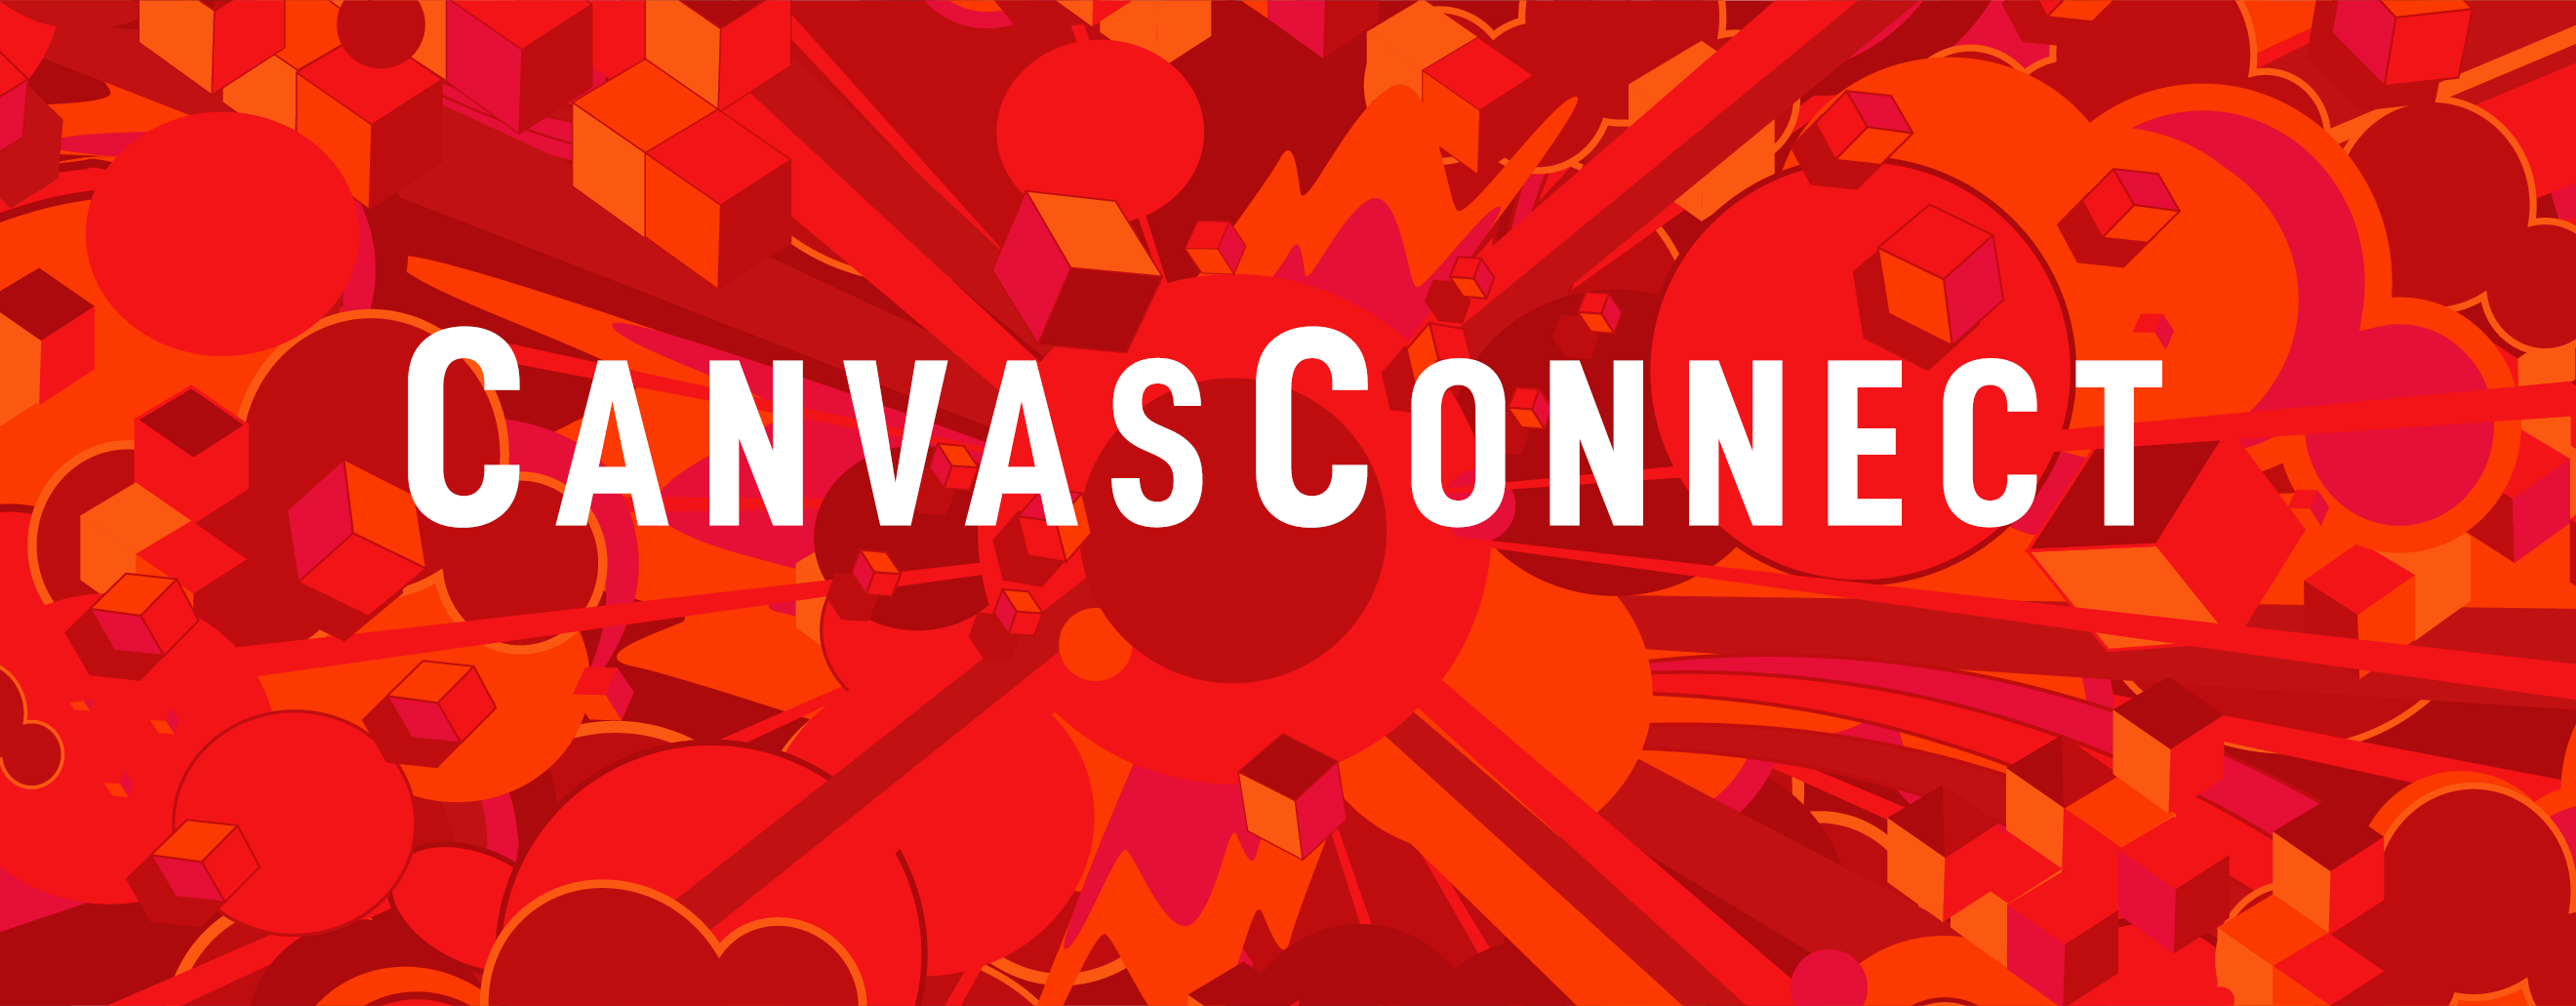 CanvasConnect | Instructure